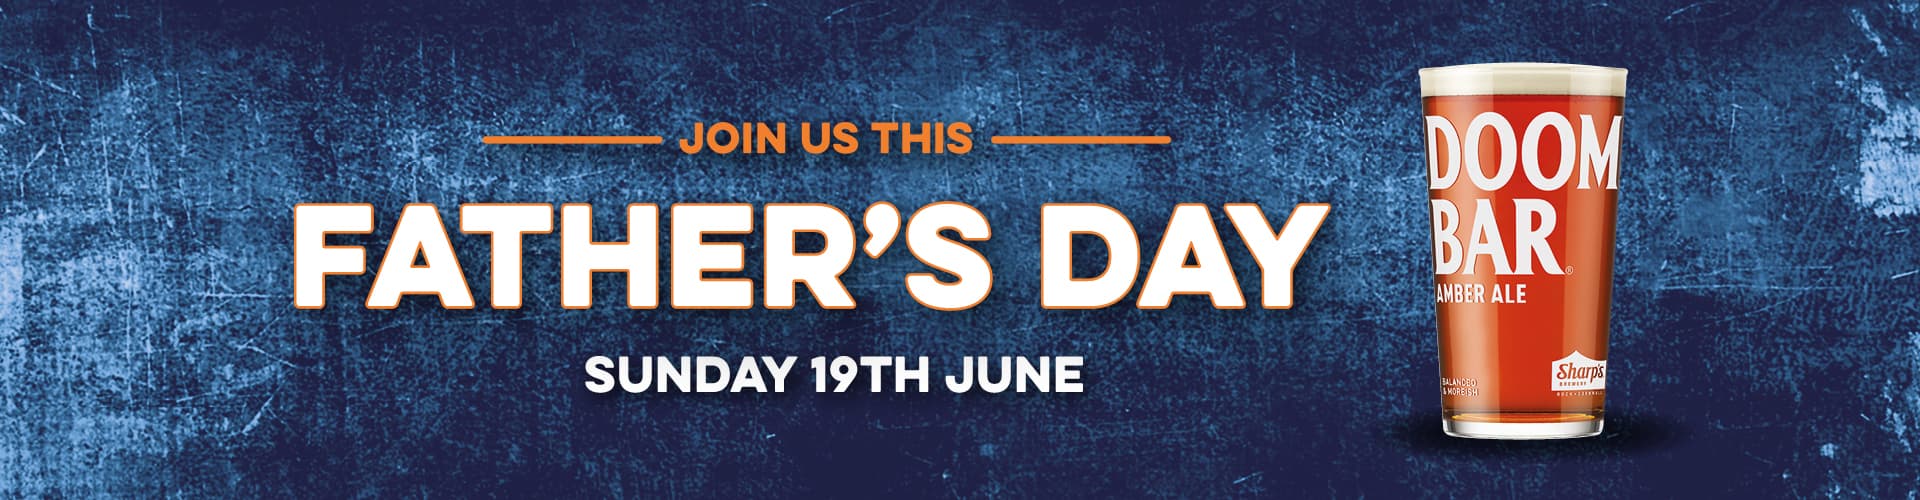 Father's Day at The Dolphin pub in Portsmouth